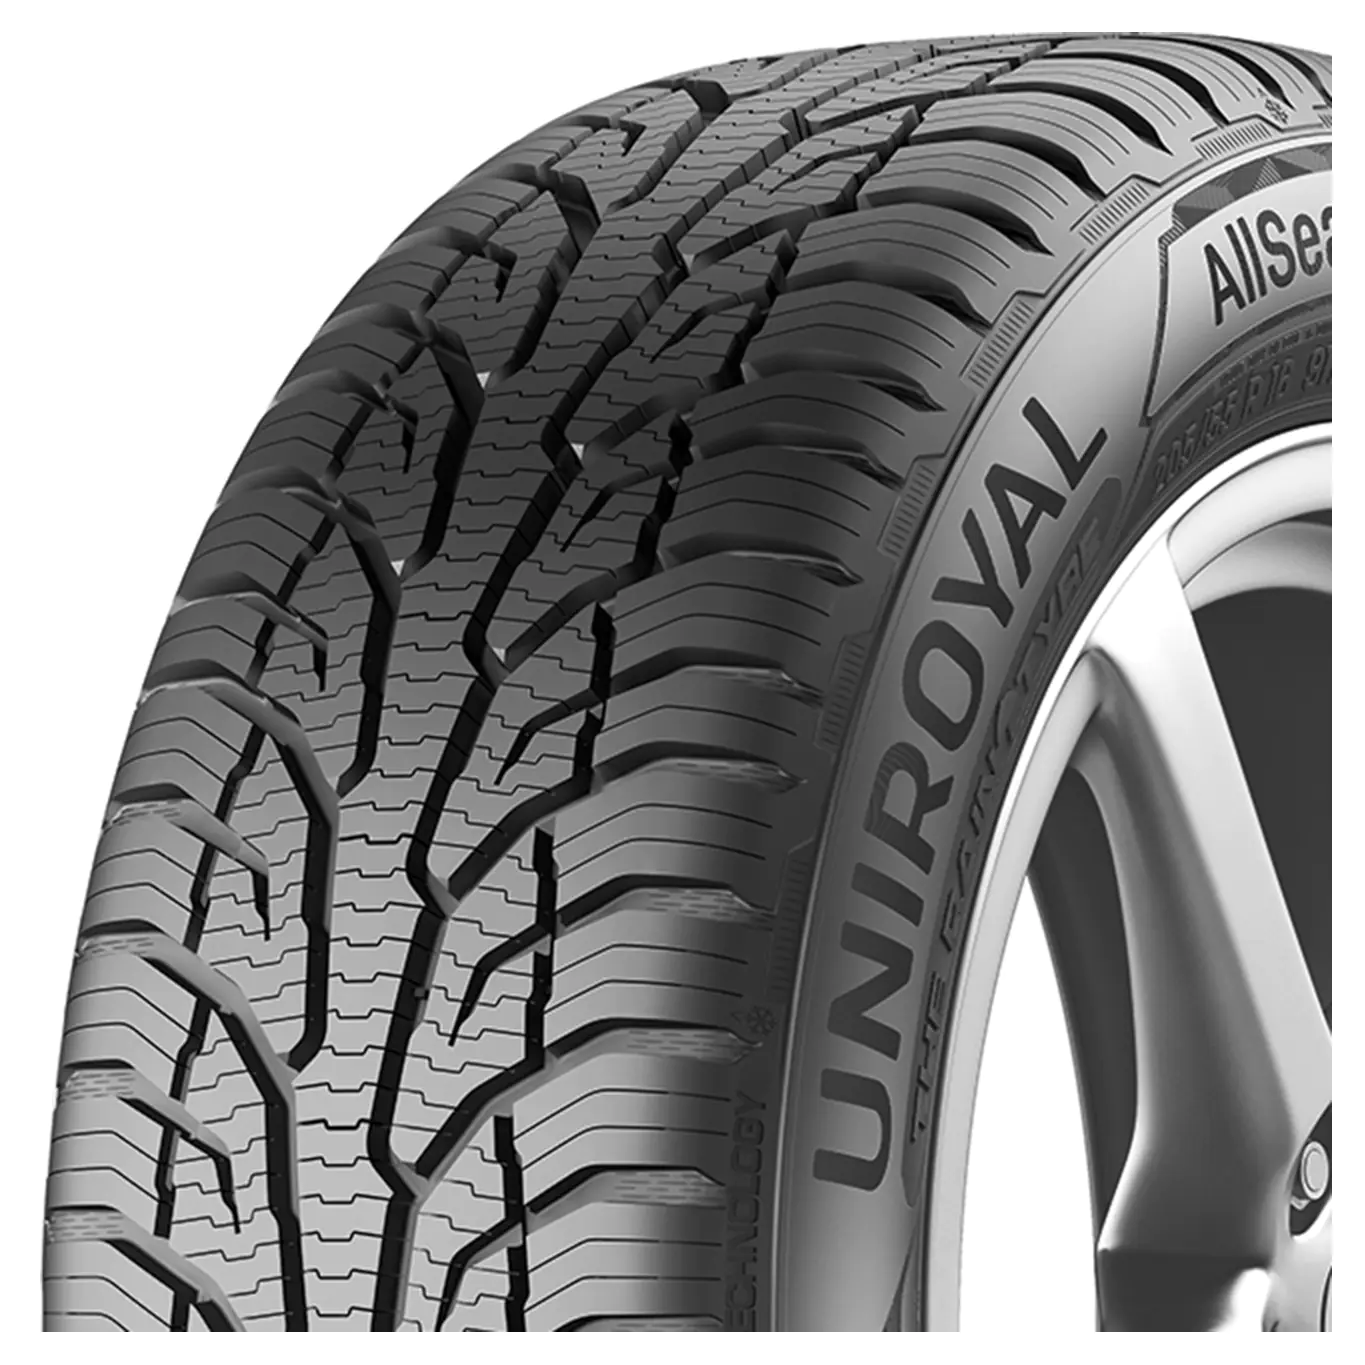 Gomme Autovettura Uniroyal 175/80 R14 88T AS EXPERT 2 M+S All Season